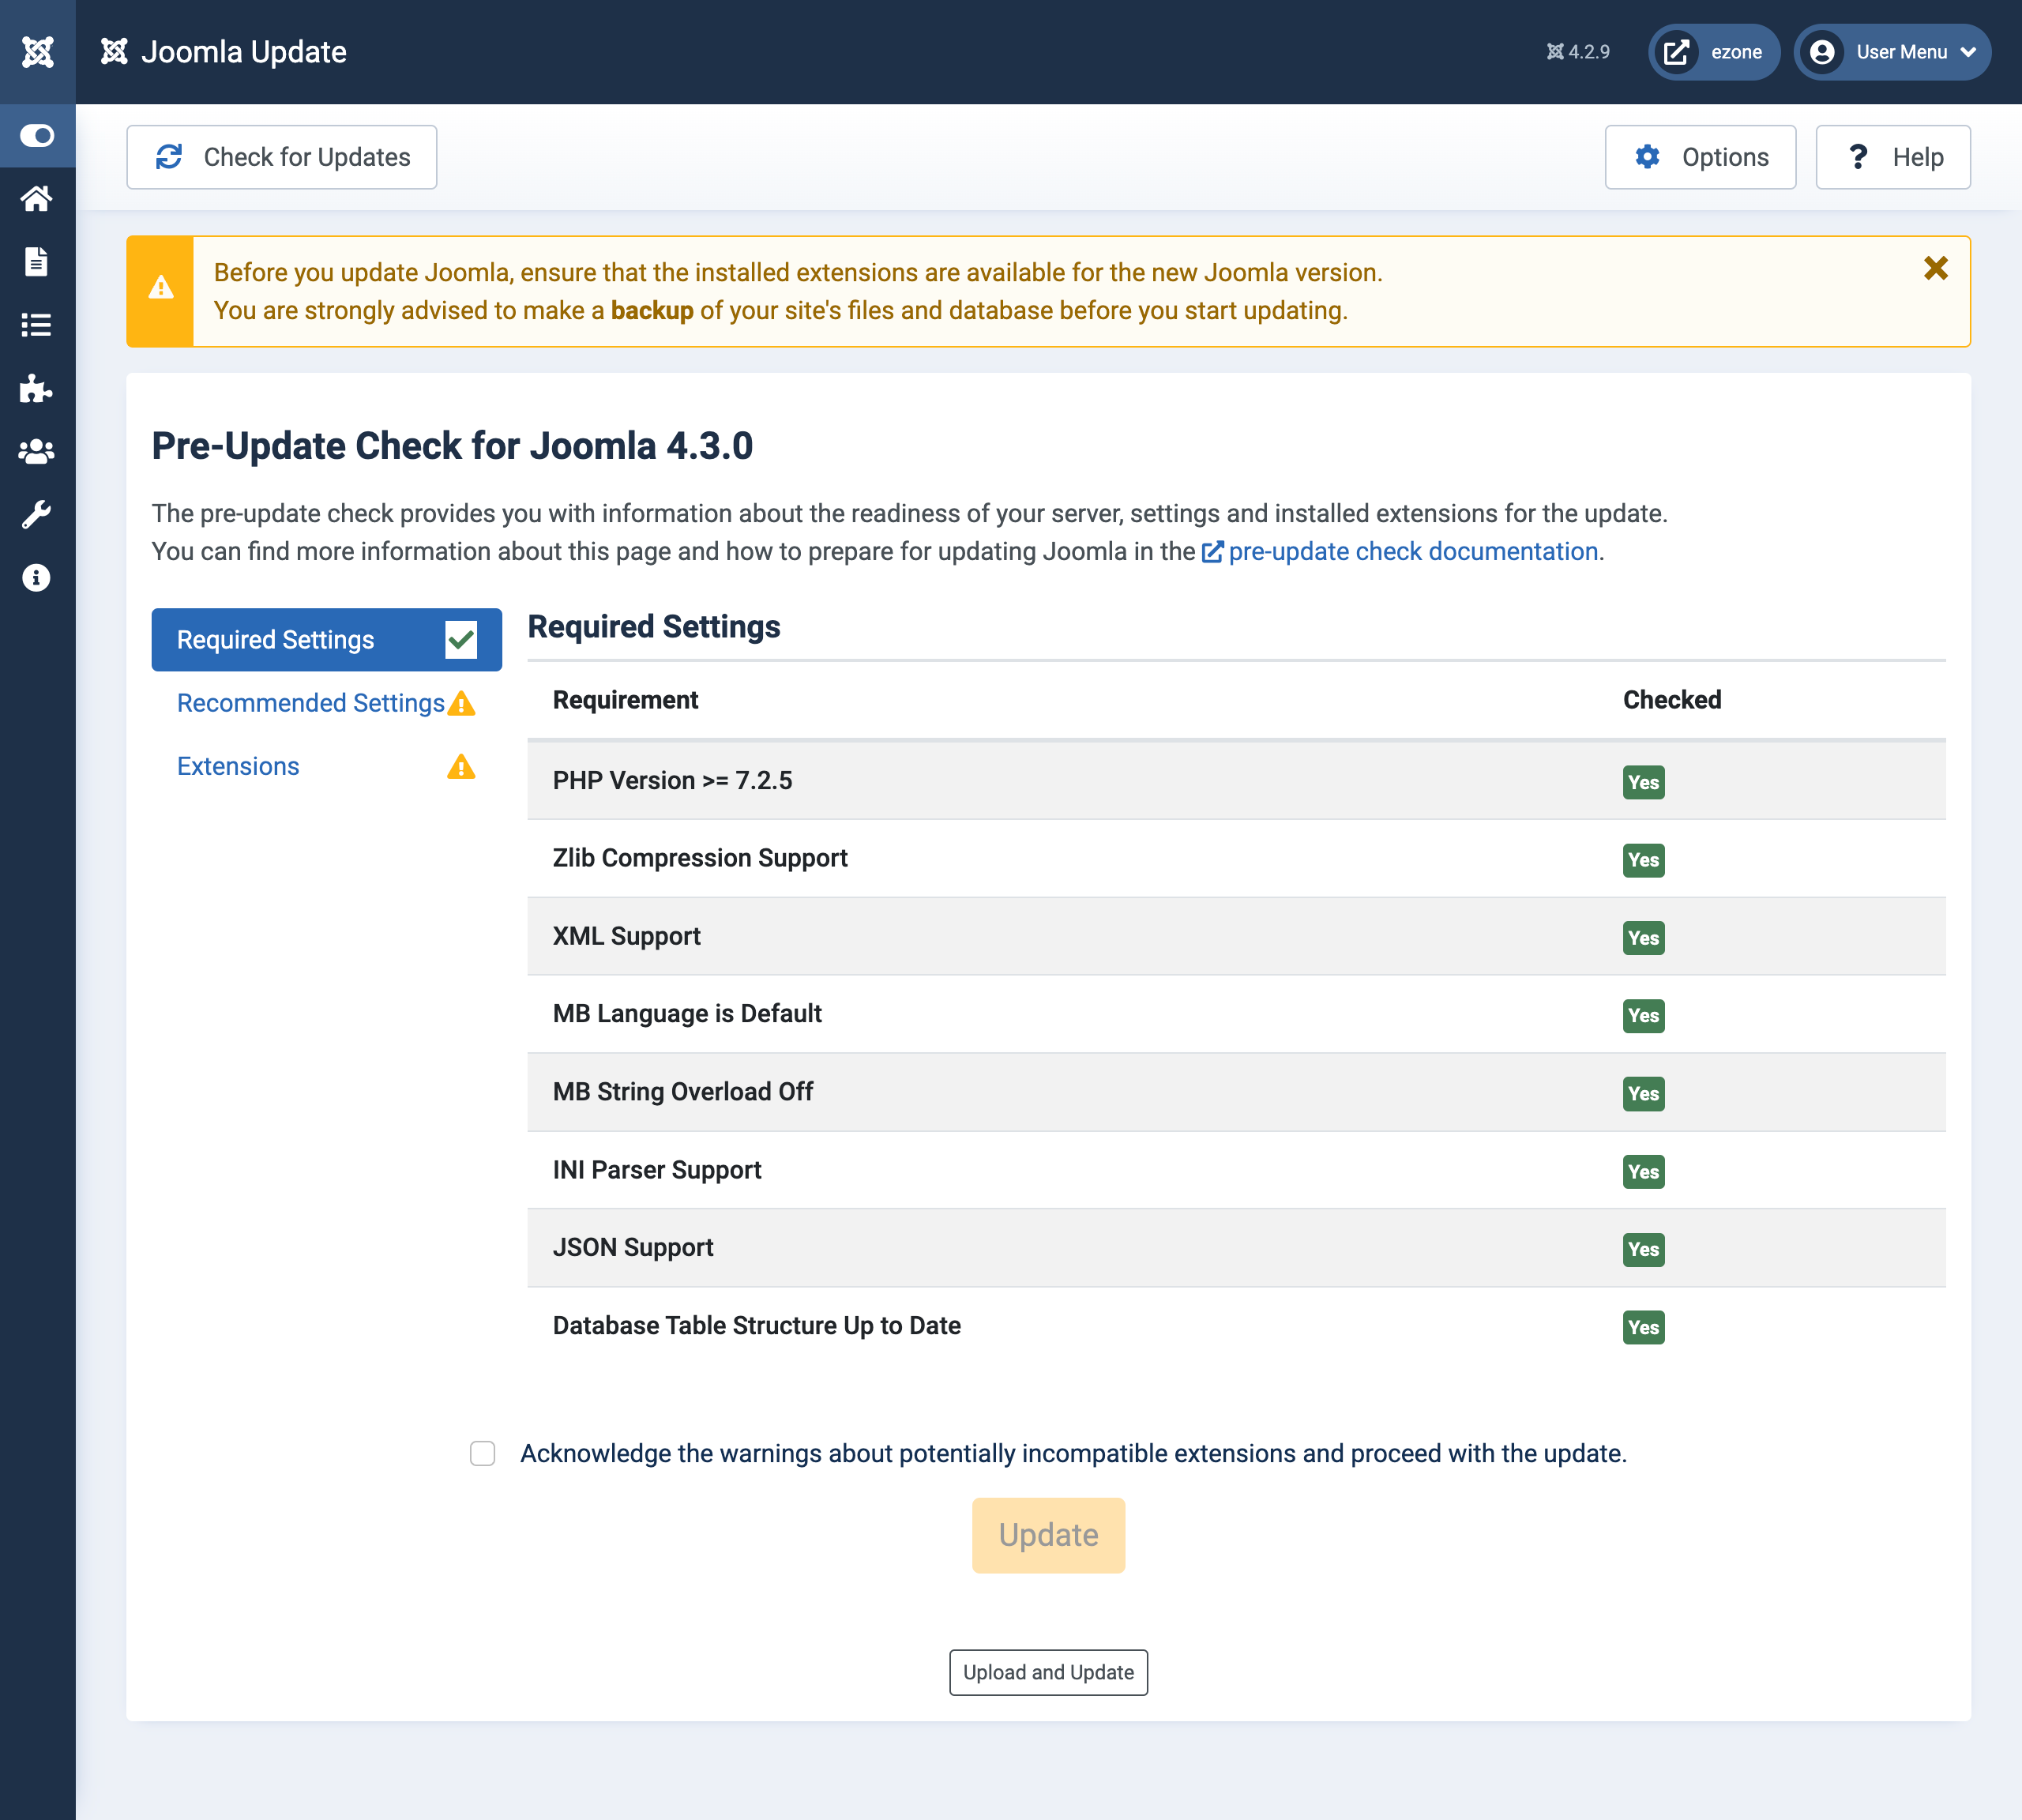 Pre-Update System Requirements check for Joomla 4